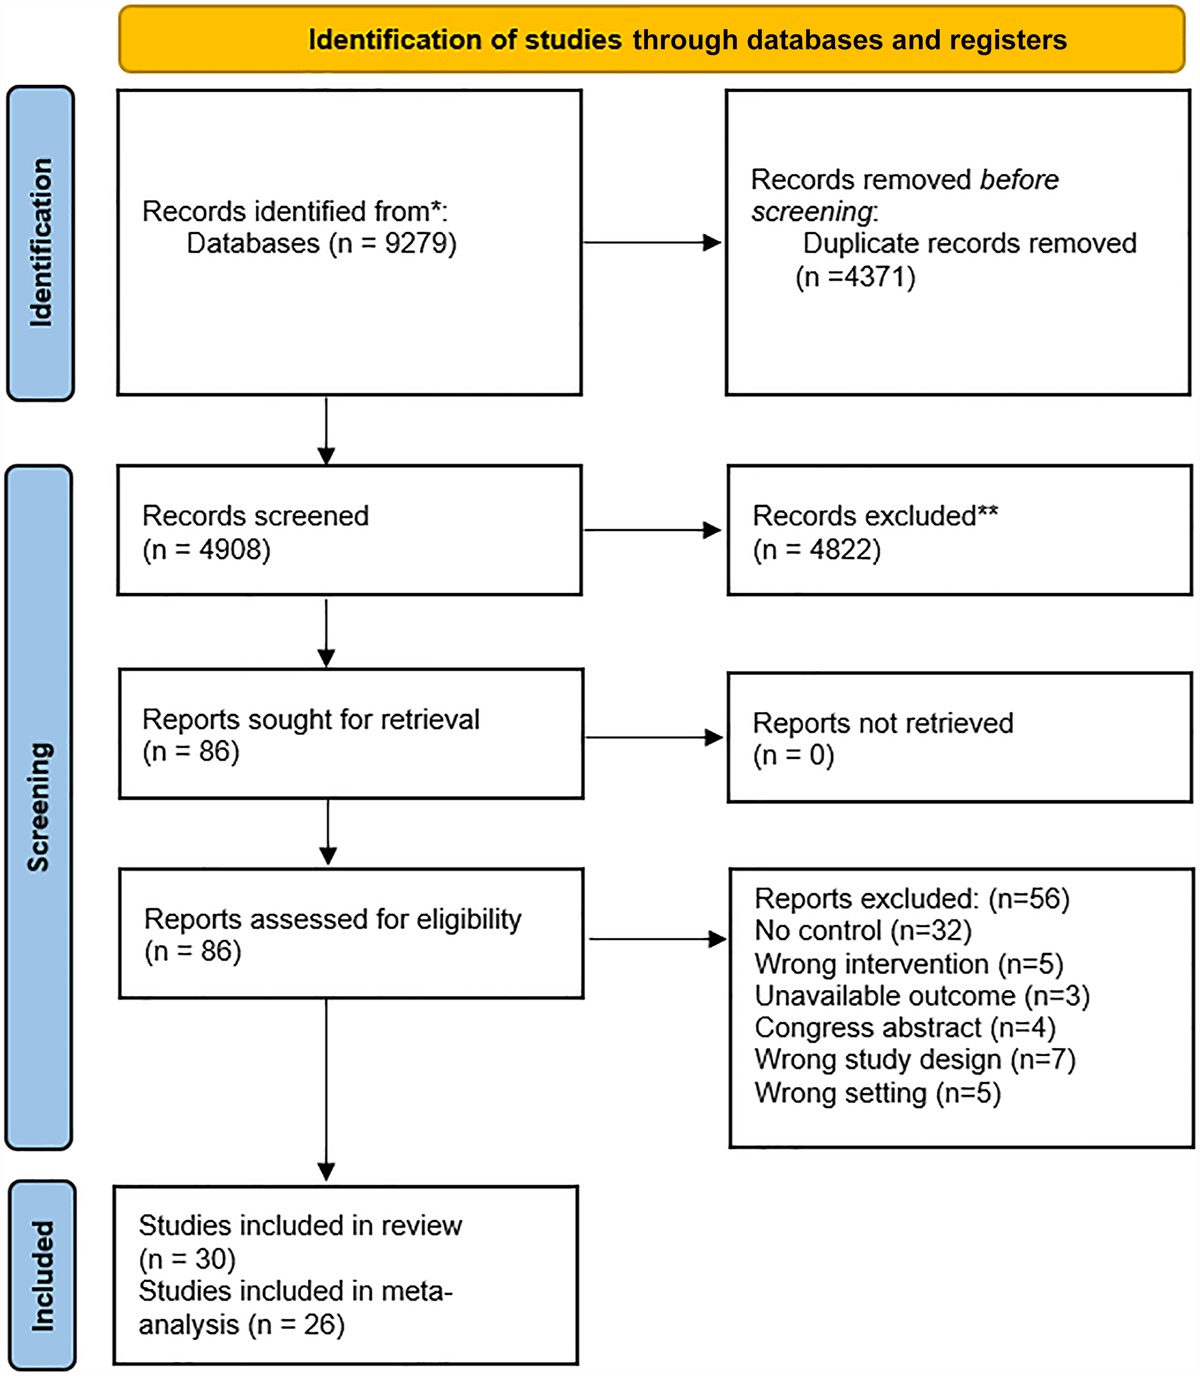 Shoulder Arthroplasty After Previous Nonarthroplasty Surgery: A Systematic Review and Meta-Analysis of Clinical Outcomes and Complications